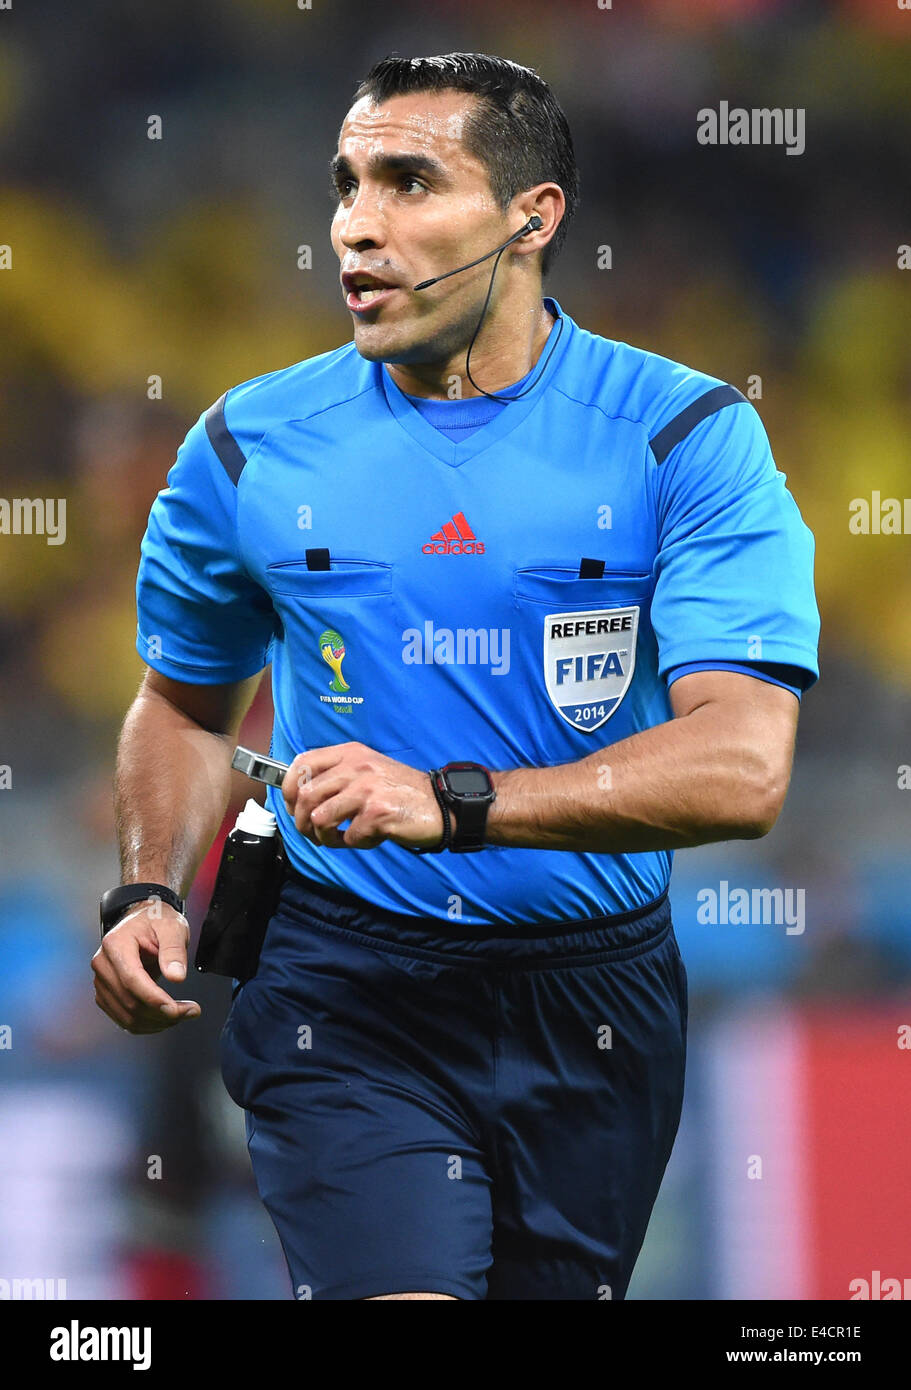 Belo Horizonte, Brazil. 08th July, 2014. Referee Marco Rodriguez of Mexico during the FIFA World Cup 2014 semi-final soccer match between Brazil and Germany at Estadio Mineirao in Belo Horizonte, Brazil, 08 July 2014. Photo: Marcus Brandt/dpa/Alamy Live News Stock Photo